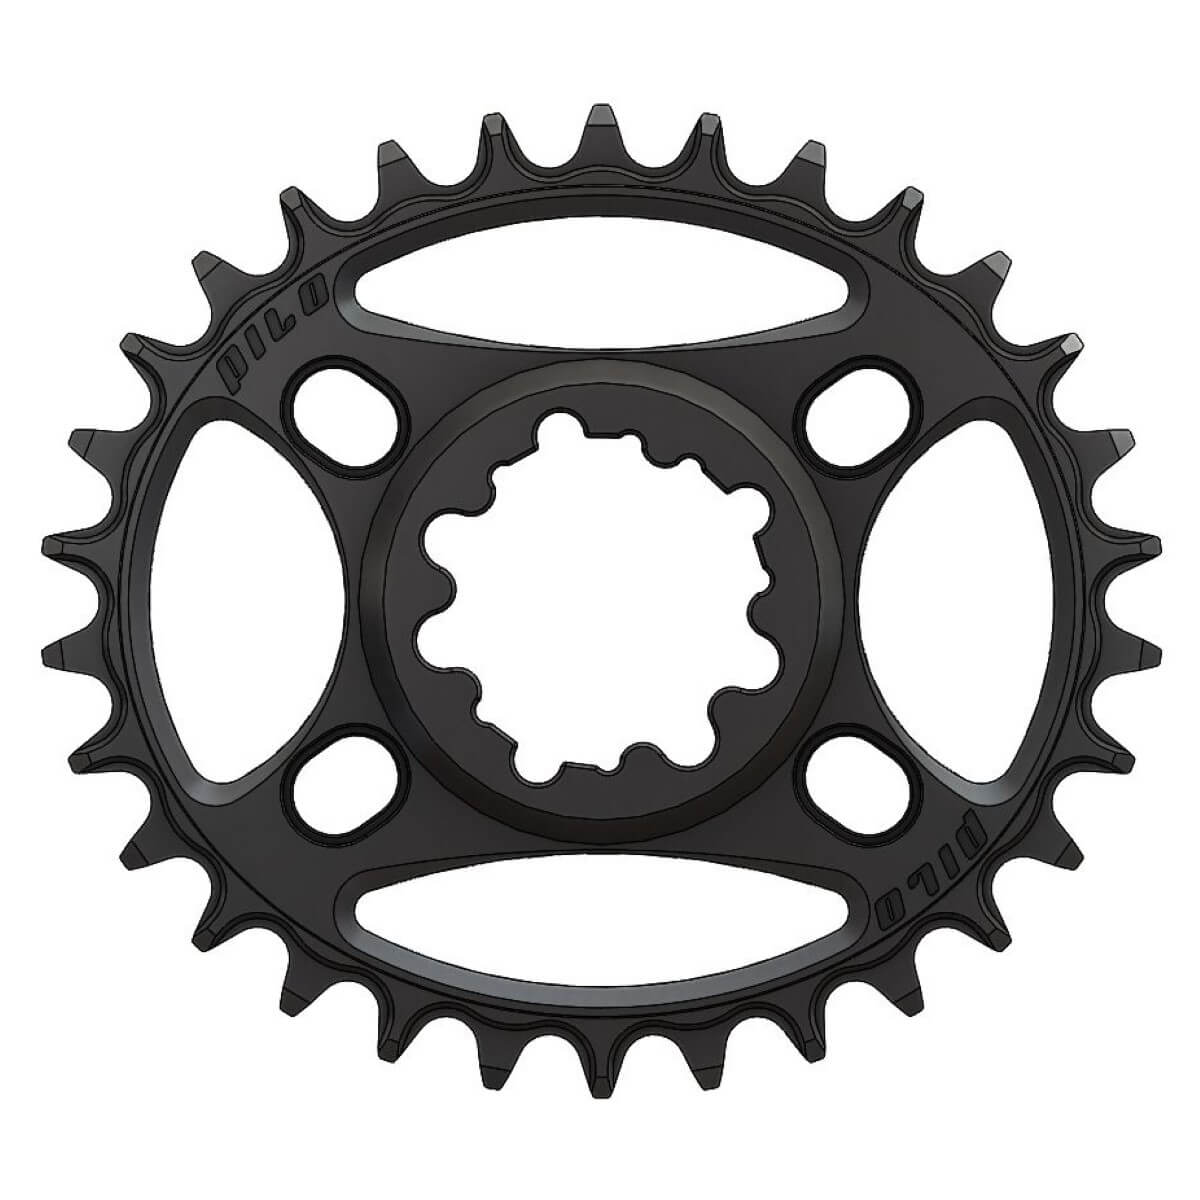 Pilo C62 Chainring Elliptic Narrow Wide 30T for Sram direct dub. Offset: 3 mm. Hyperglide+ Compatible